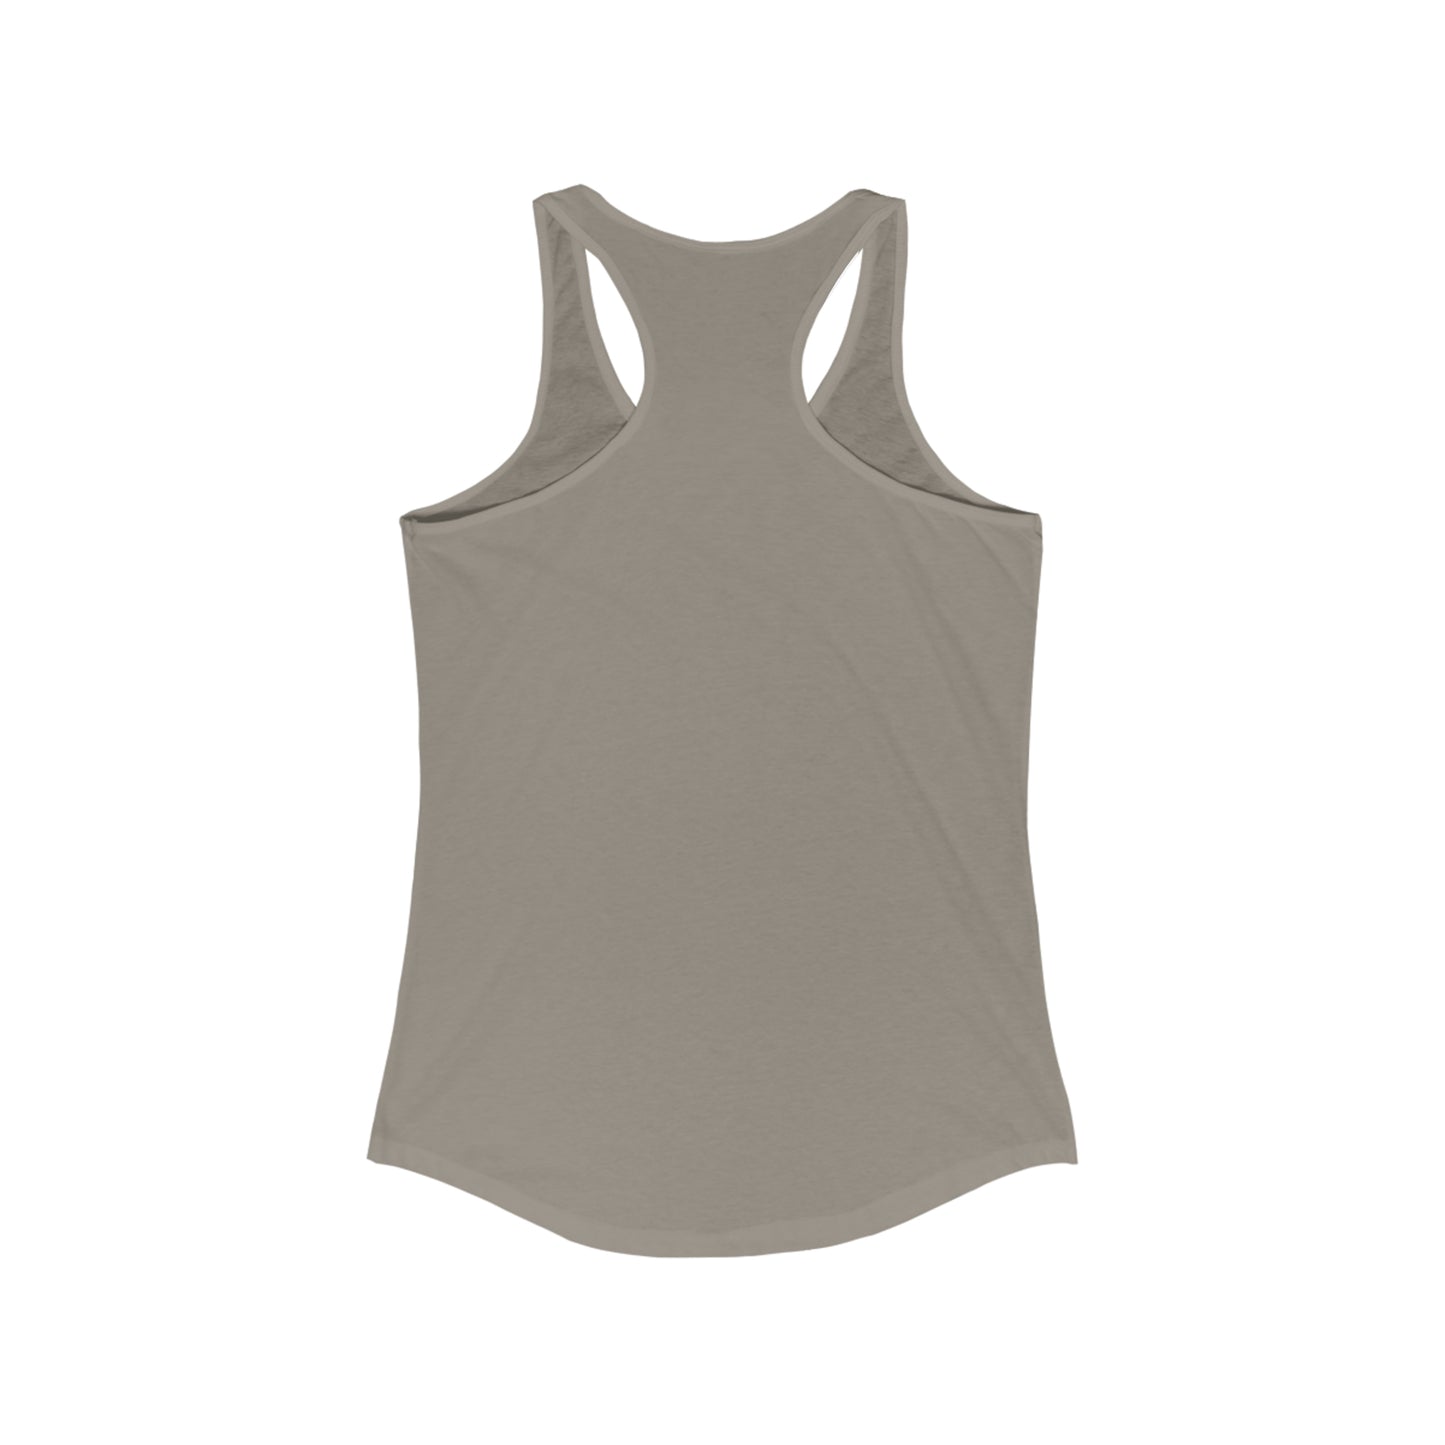 Nama Stay At The Pickleball Courts. Women's Racerback Tank Top